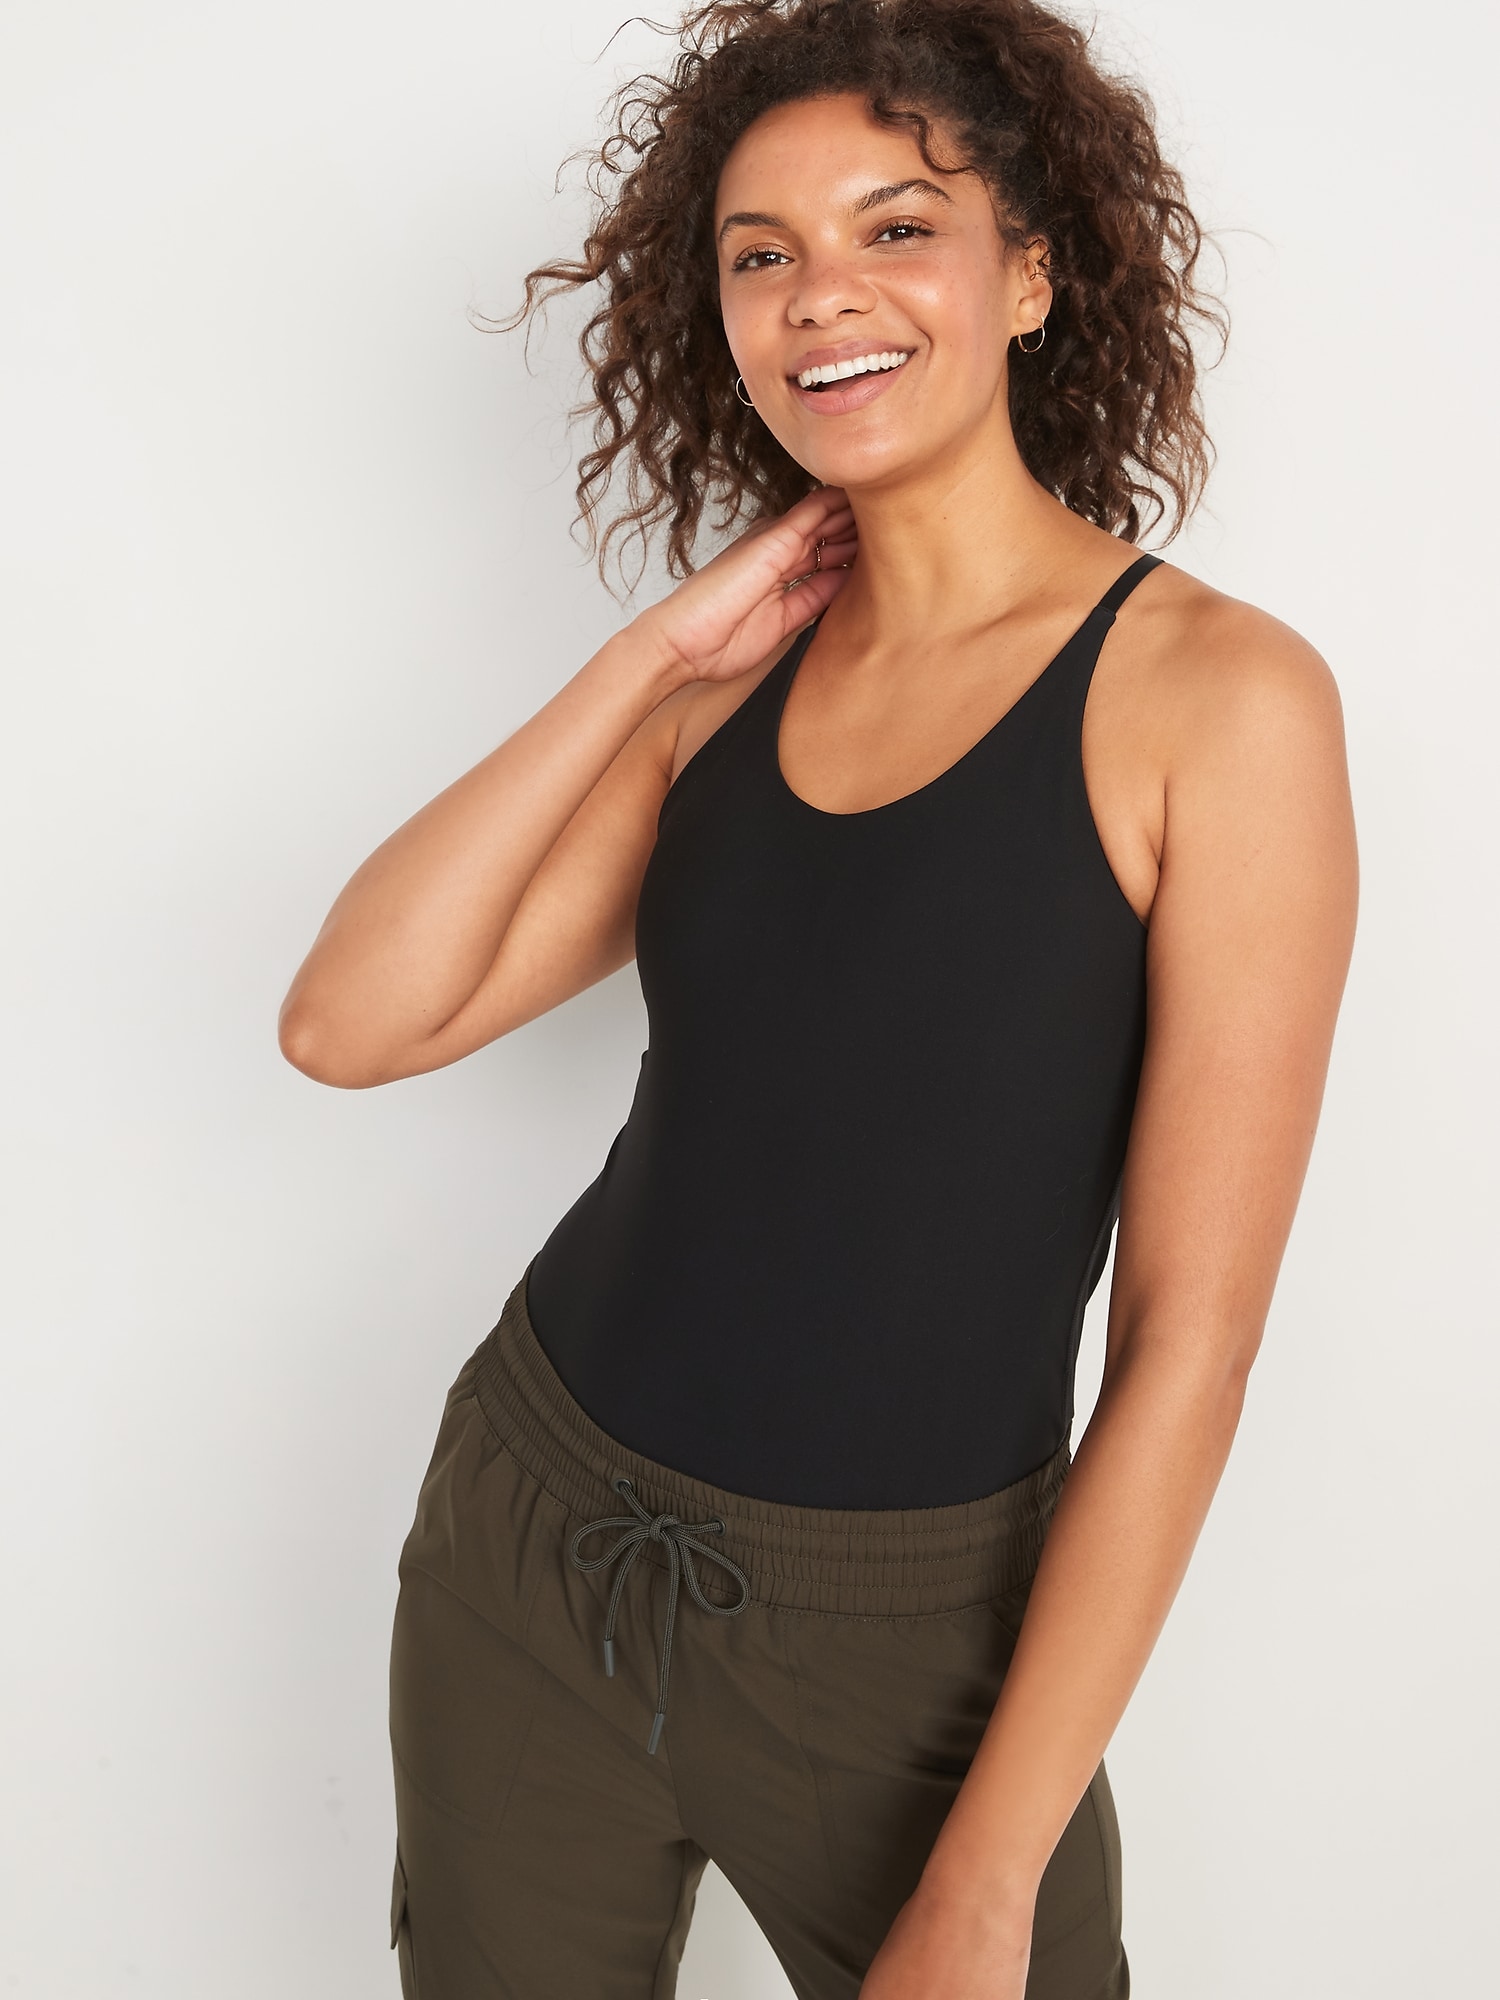 Old Navy Inkwell PowerLite LYCRA ADAPTIV Racerback Shelf-Bra Active Tank  Top - L Gray Size L - $35 (12% Off Retail) - From Lindsay